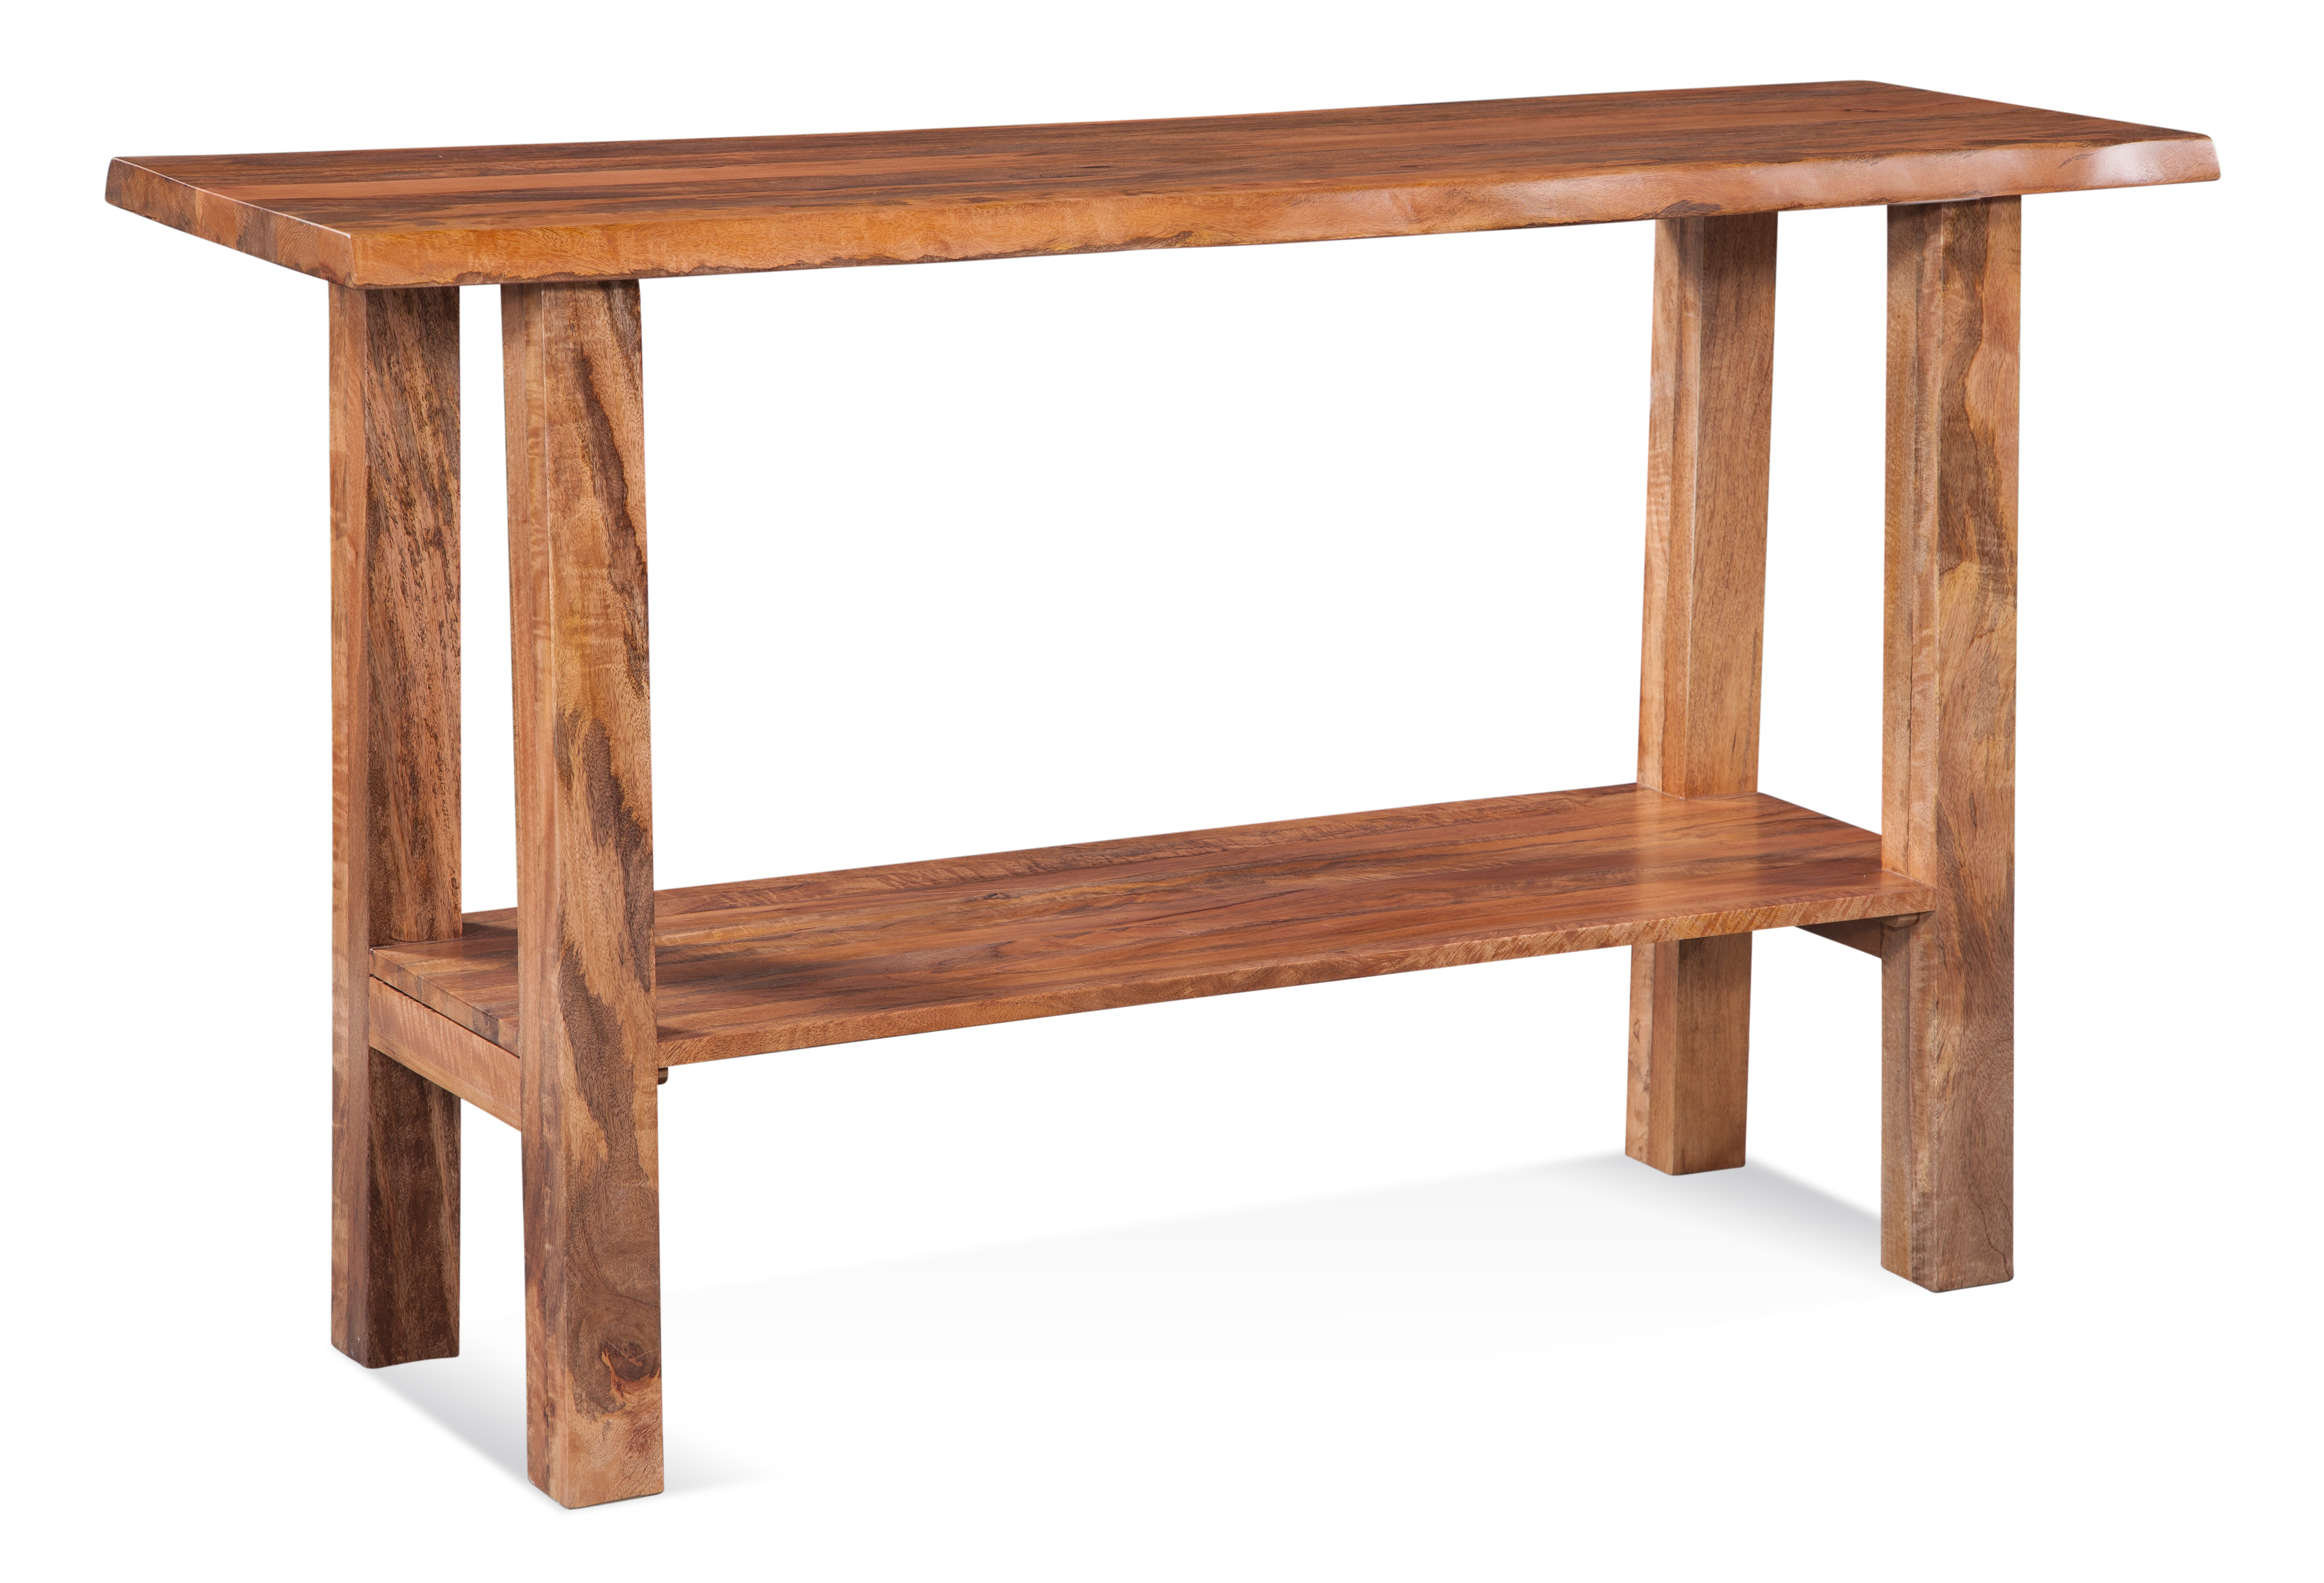 Details about   Oak Sofa Table With Shelf 